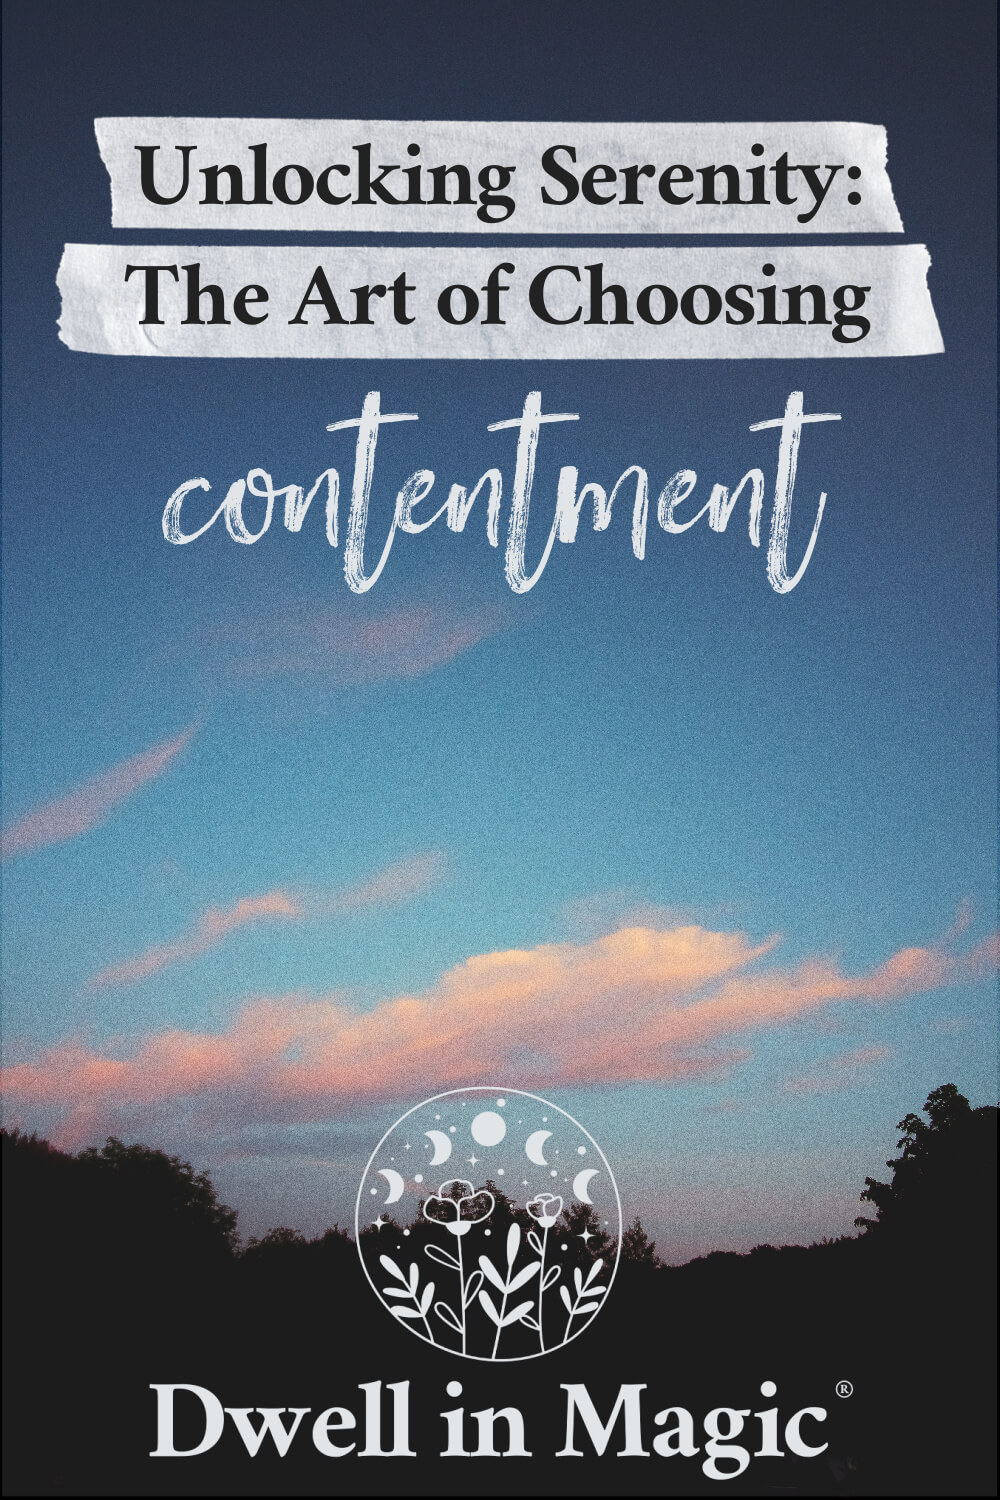 Six ways to unlock the serenity and absolute MAGIC of choosing a life of contentment.